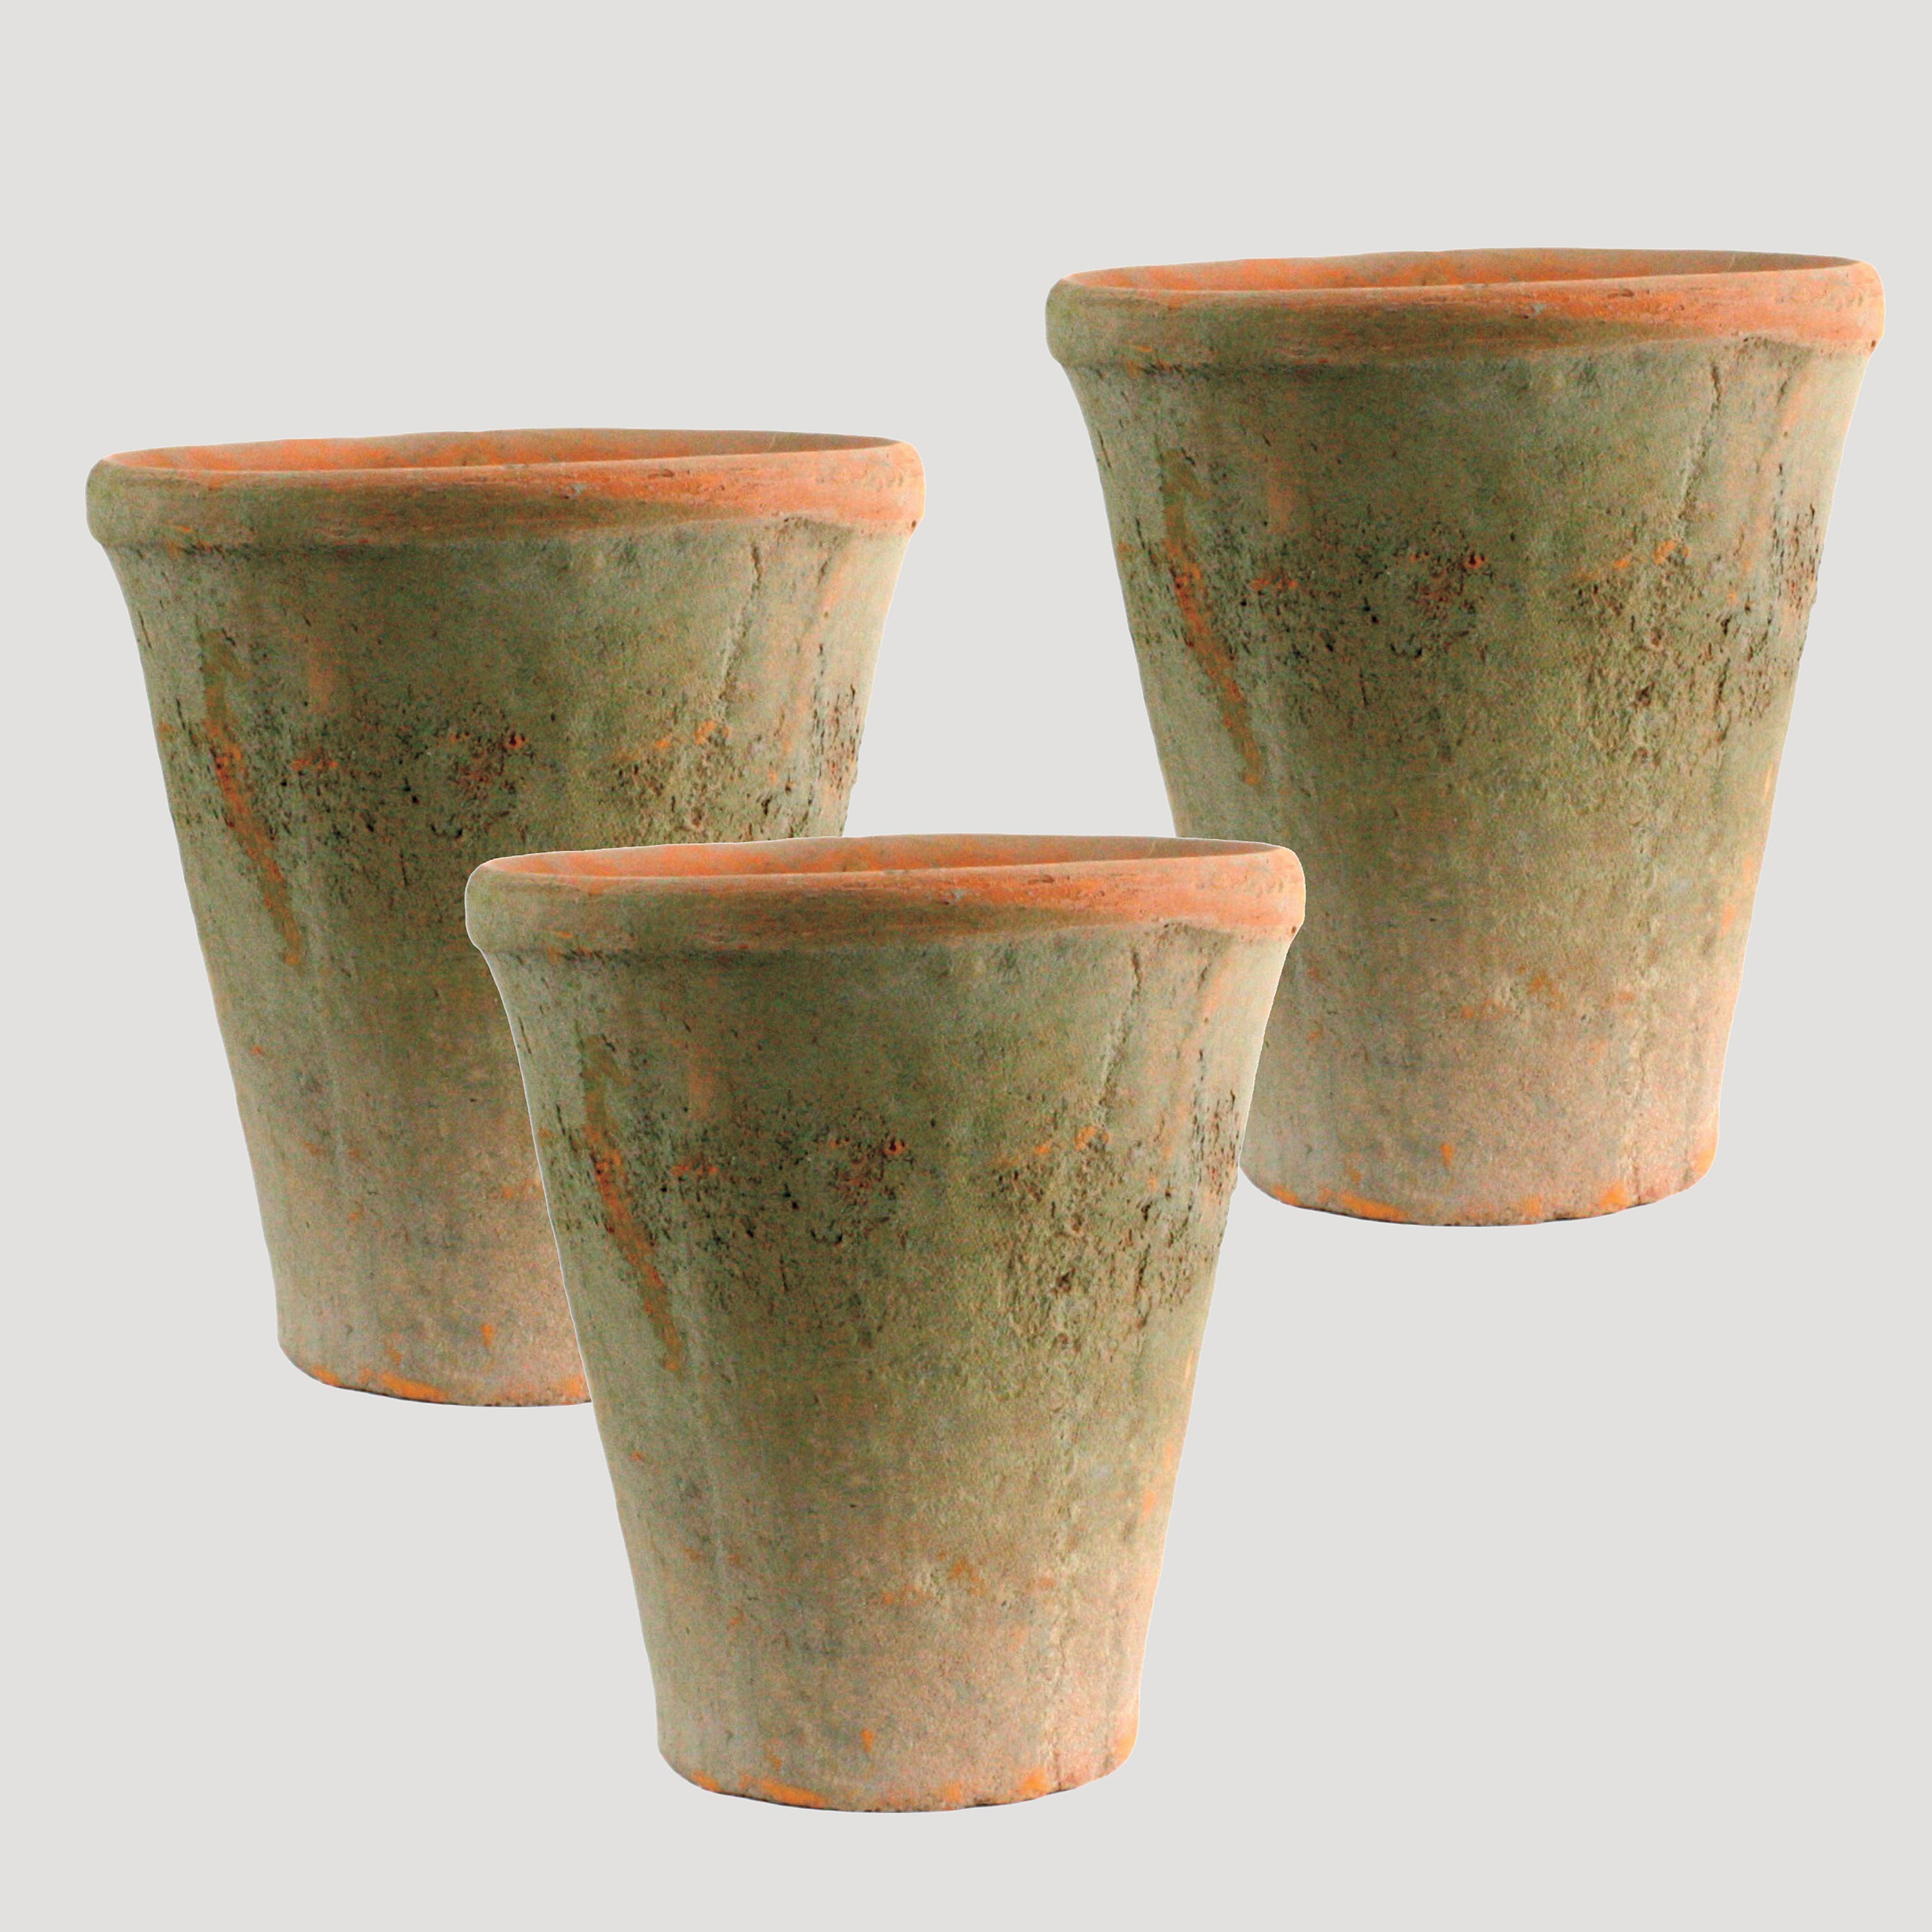 Handcrafted Rustic Terracotta Planters, Set of 3